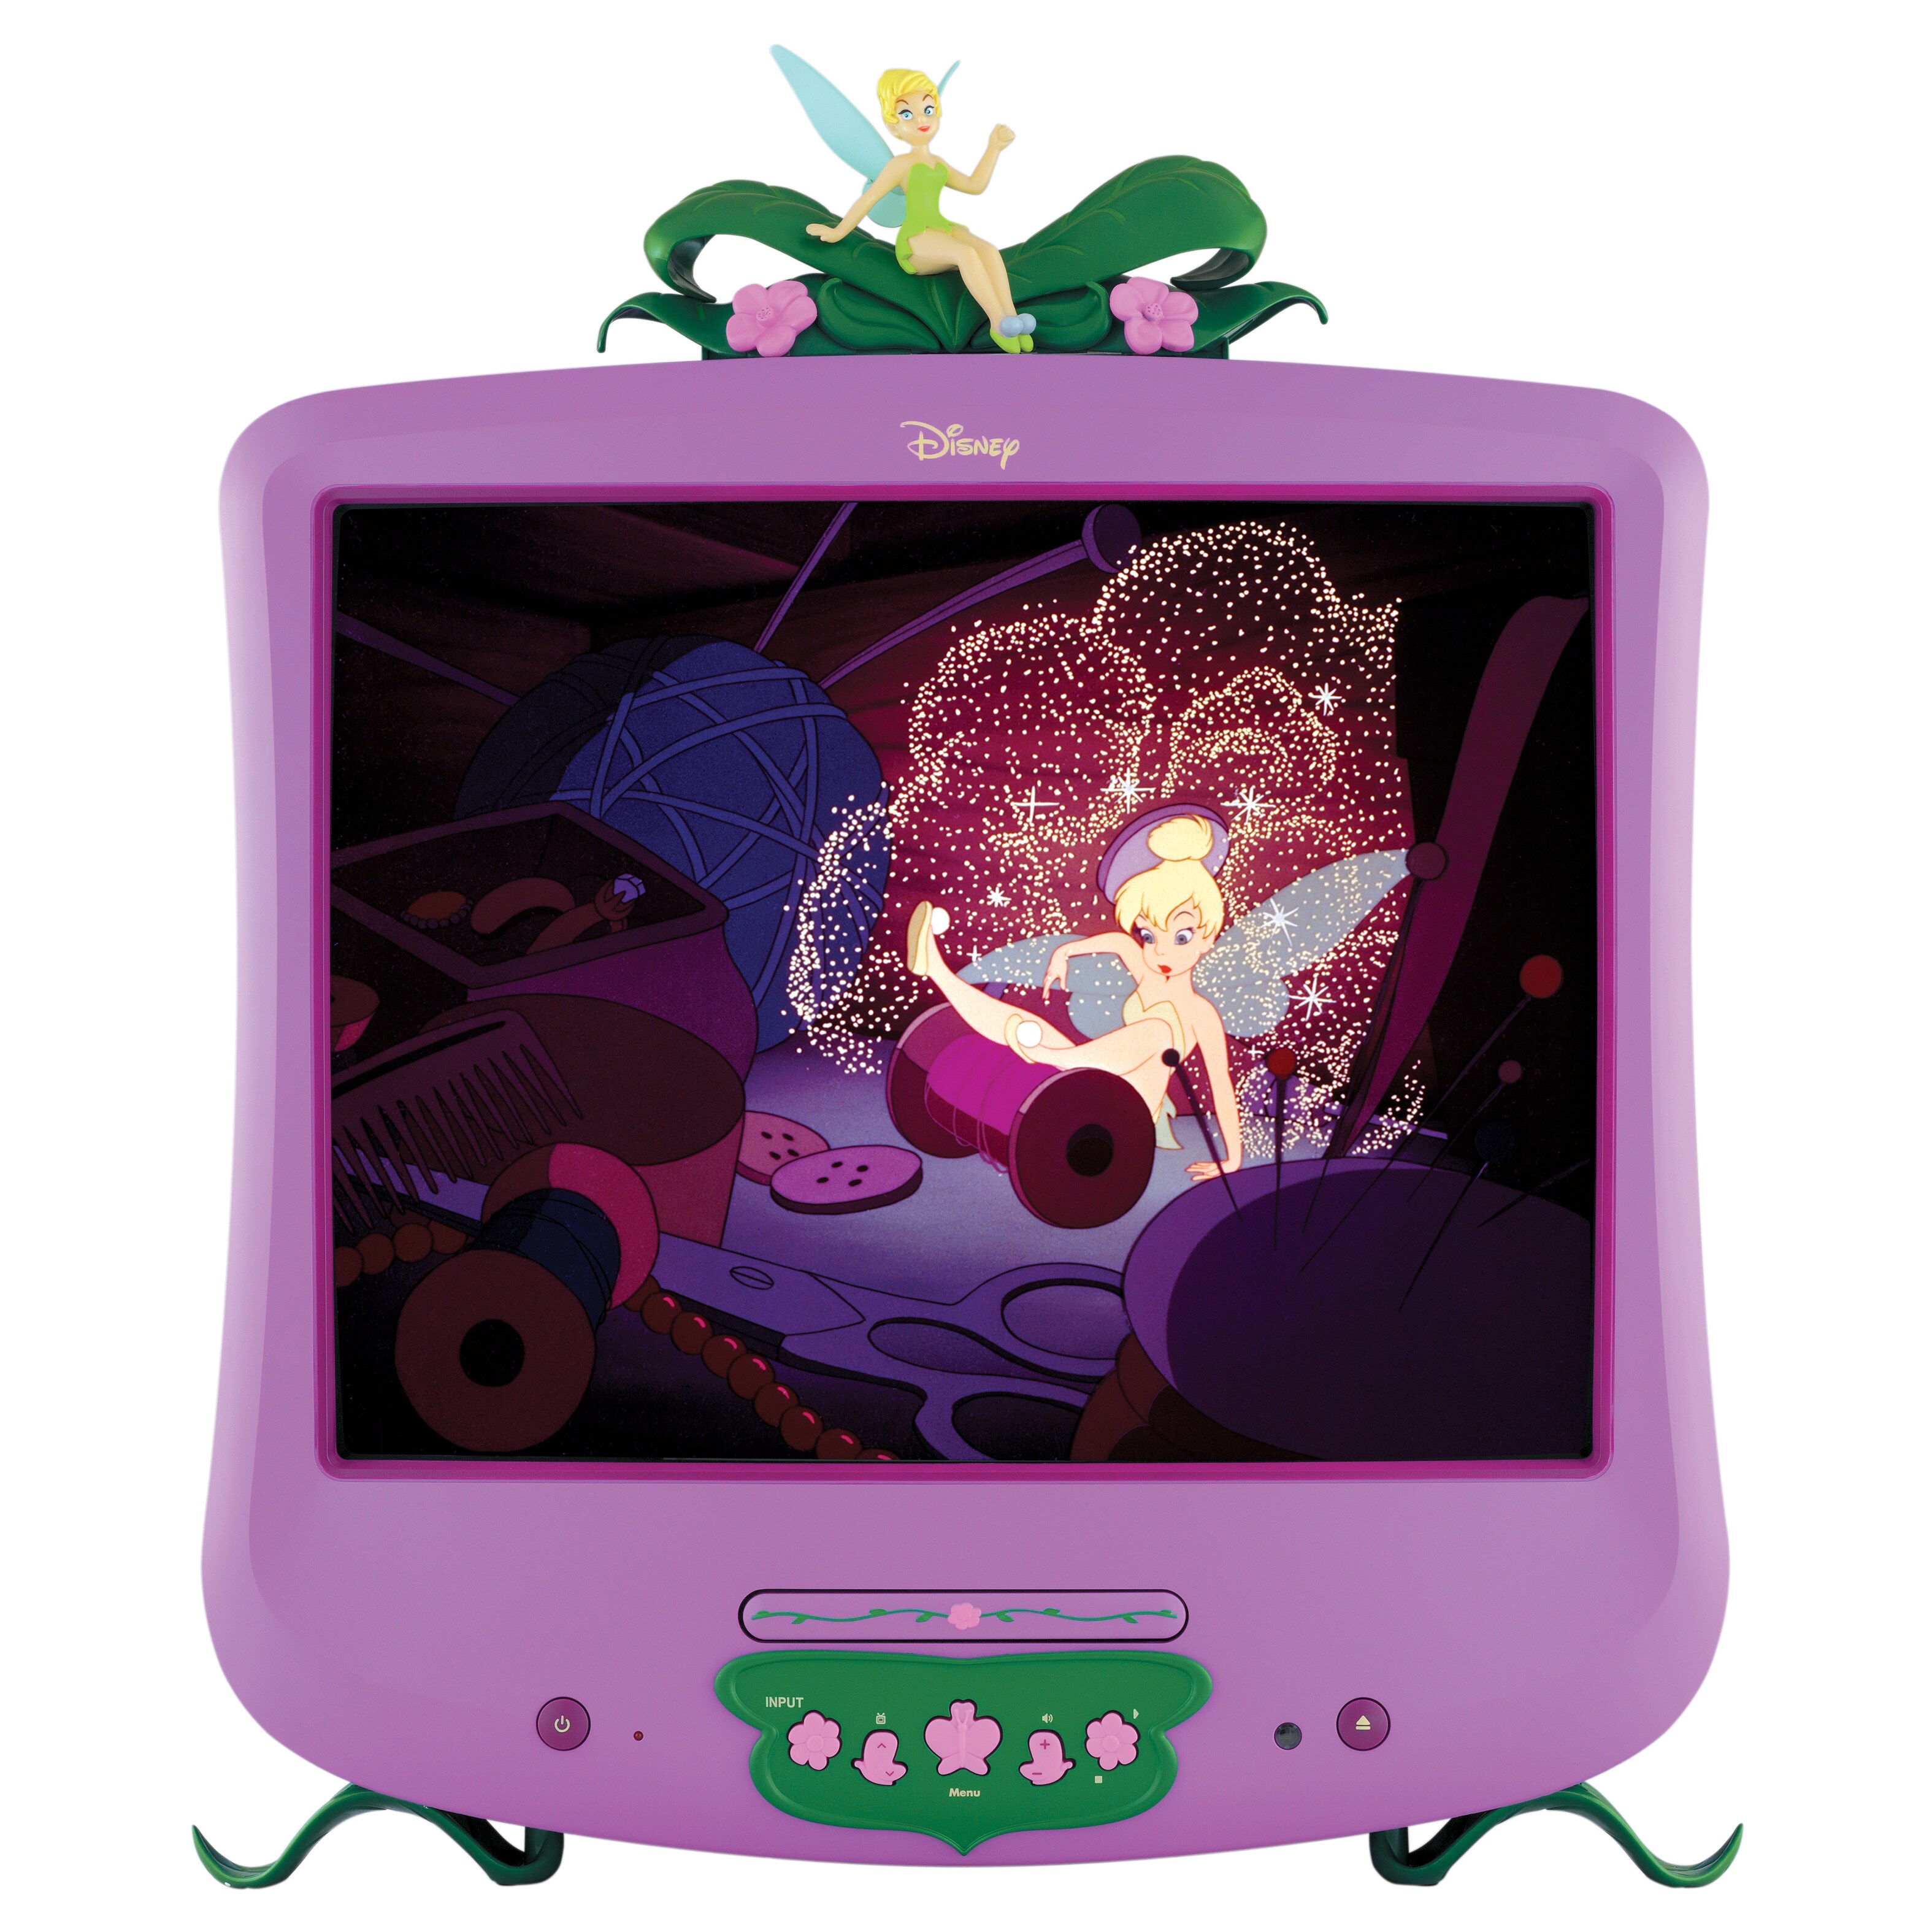 Disney Fairies Color Tv Dvd Combo With Digital Tuner And Remote Control Overstock